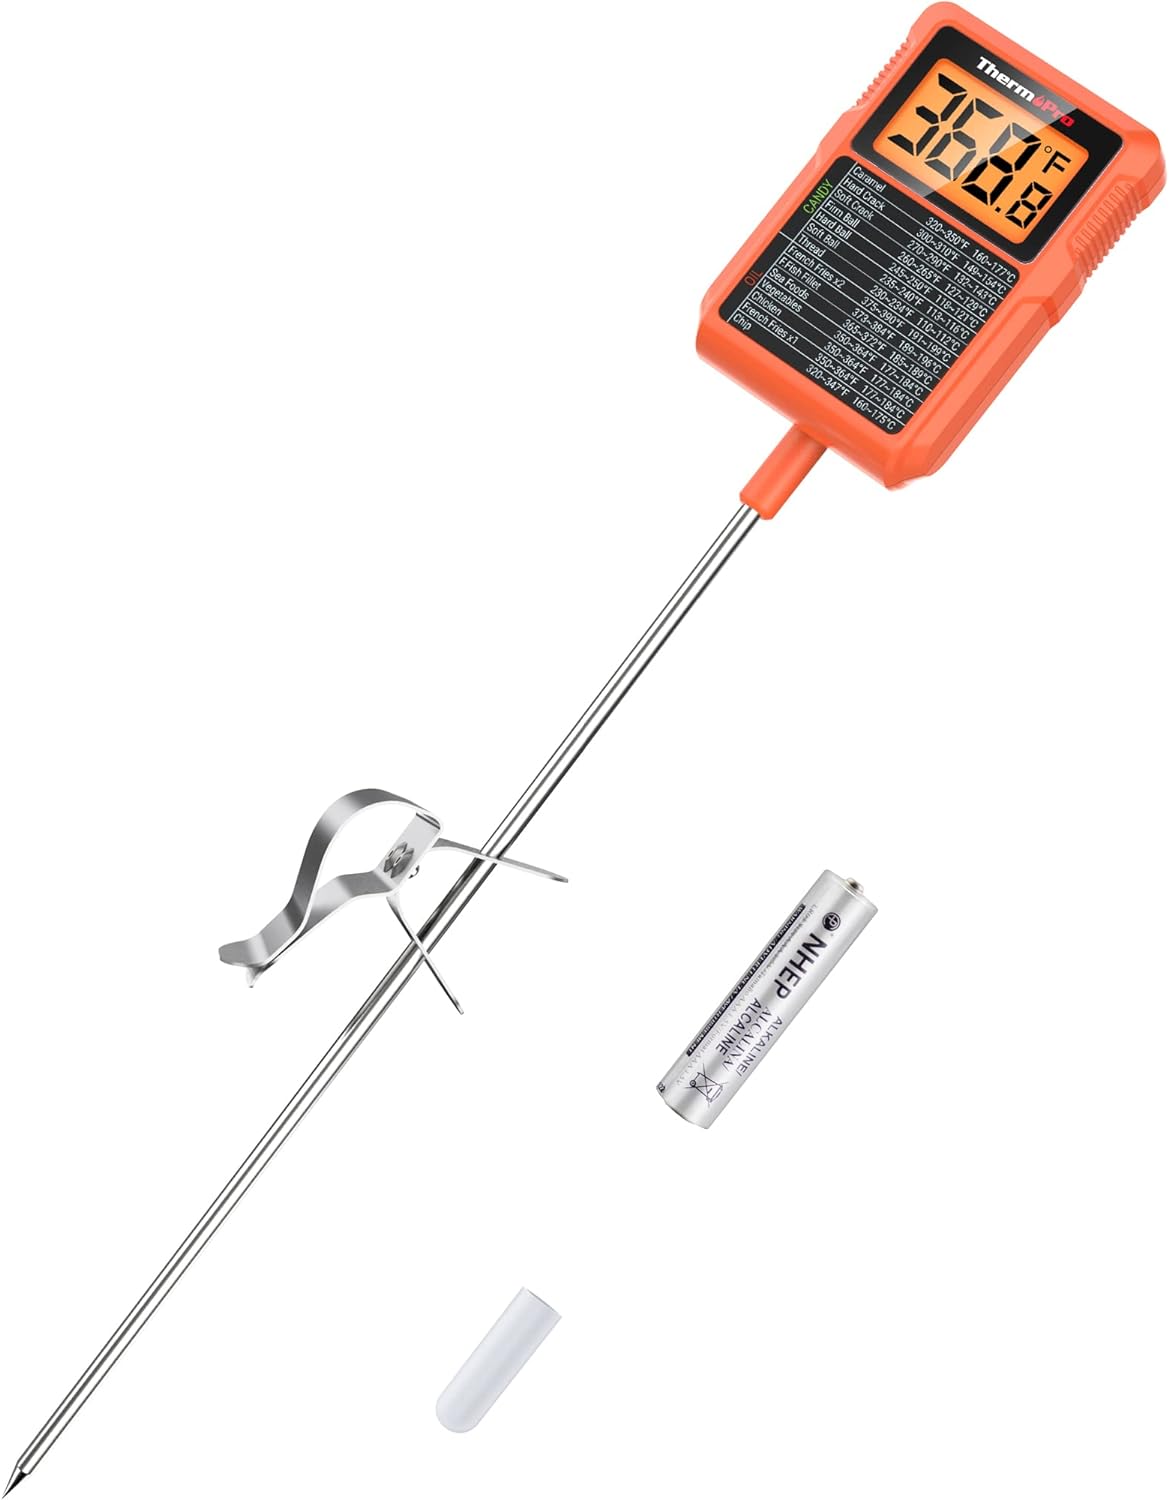 ThermoPro TP510 Waterproof Digital Candy Thermometer with Pot Clip, 8 Long Probe Instant Read Food Cooking Meat Thermometer for Grilling Smoker BBQ Deep Fry Oil Thermometer